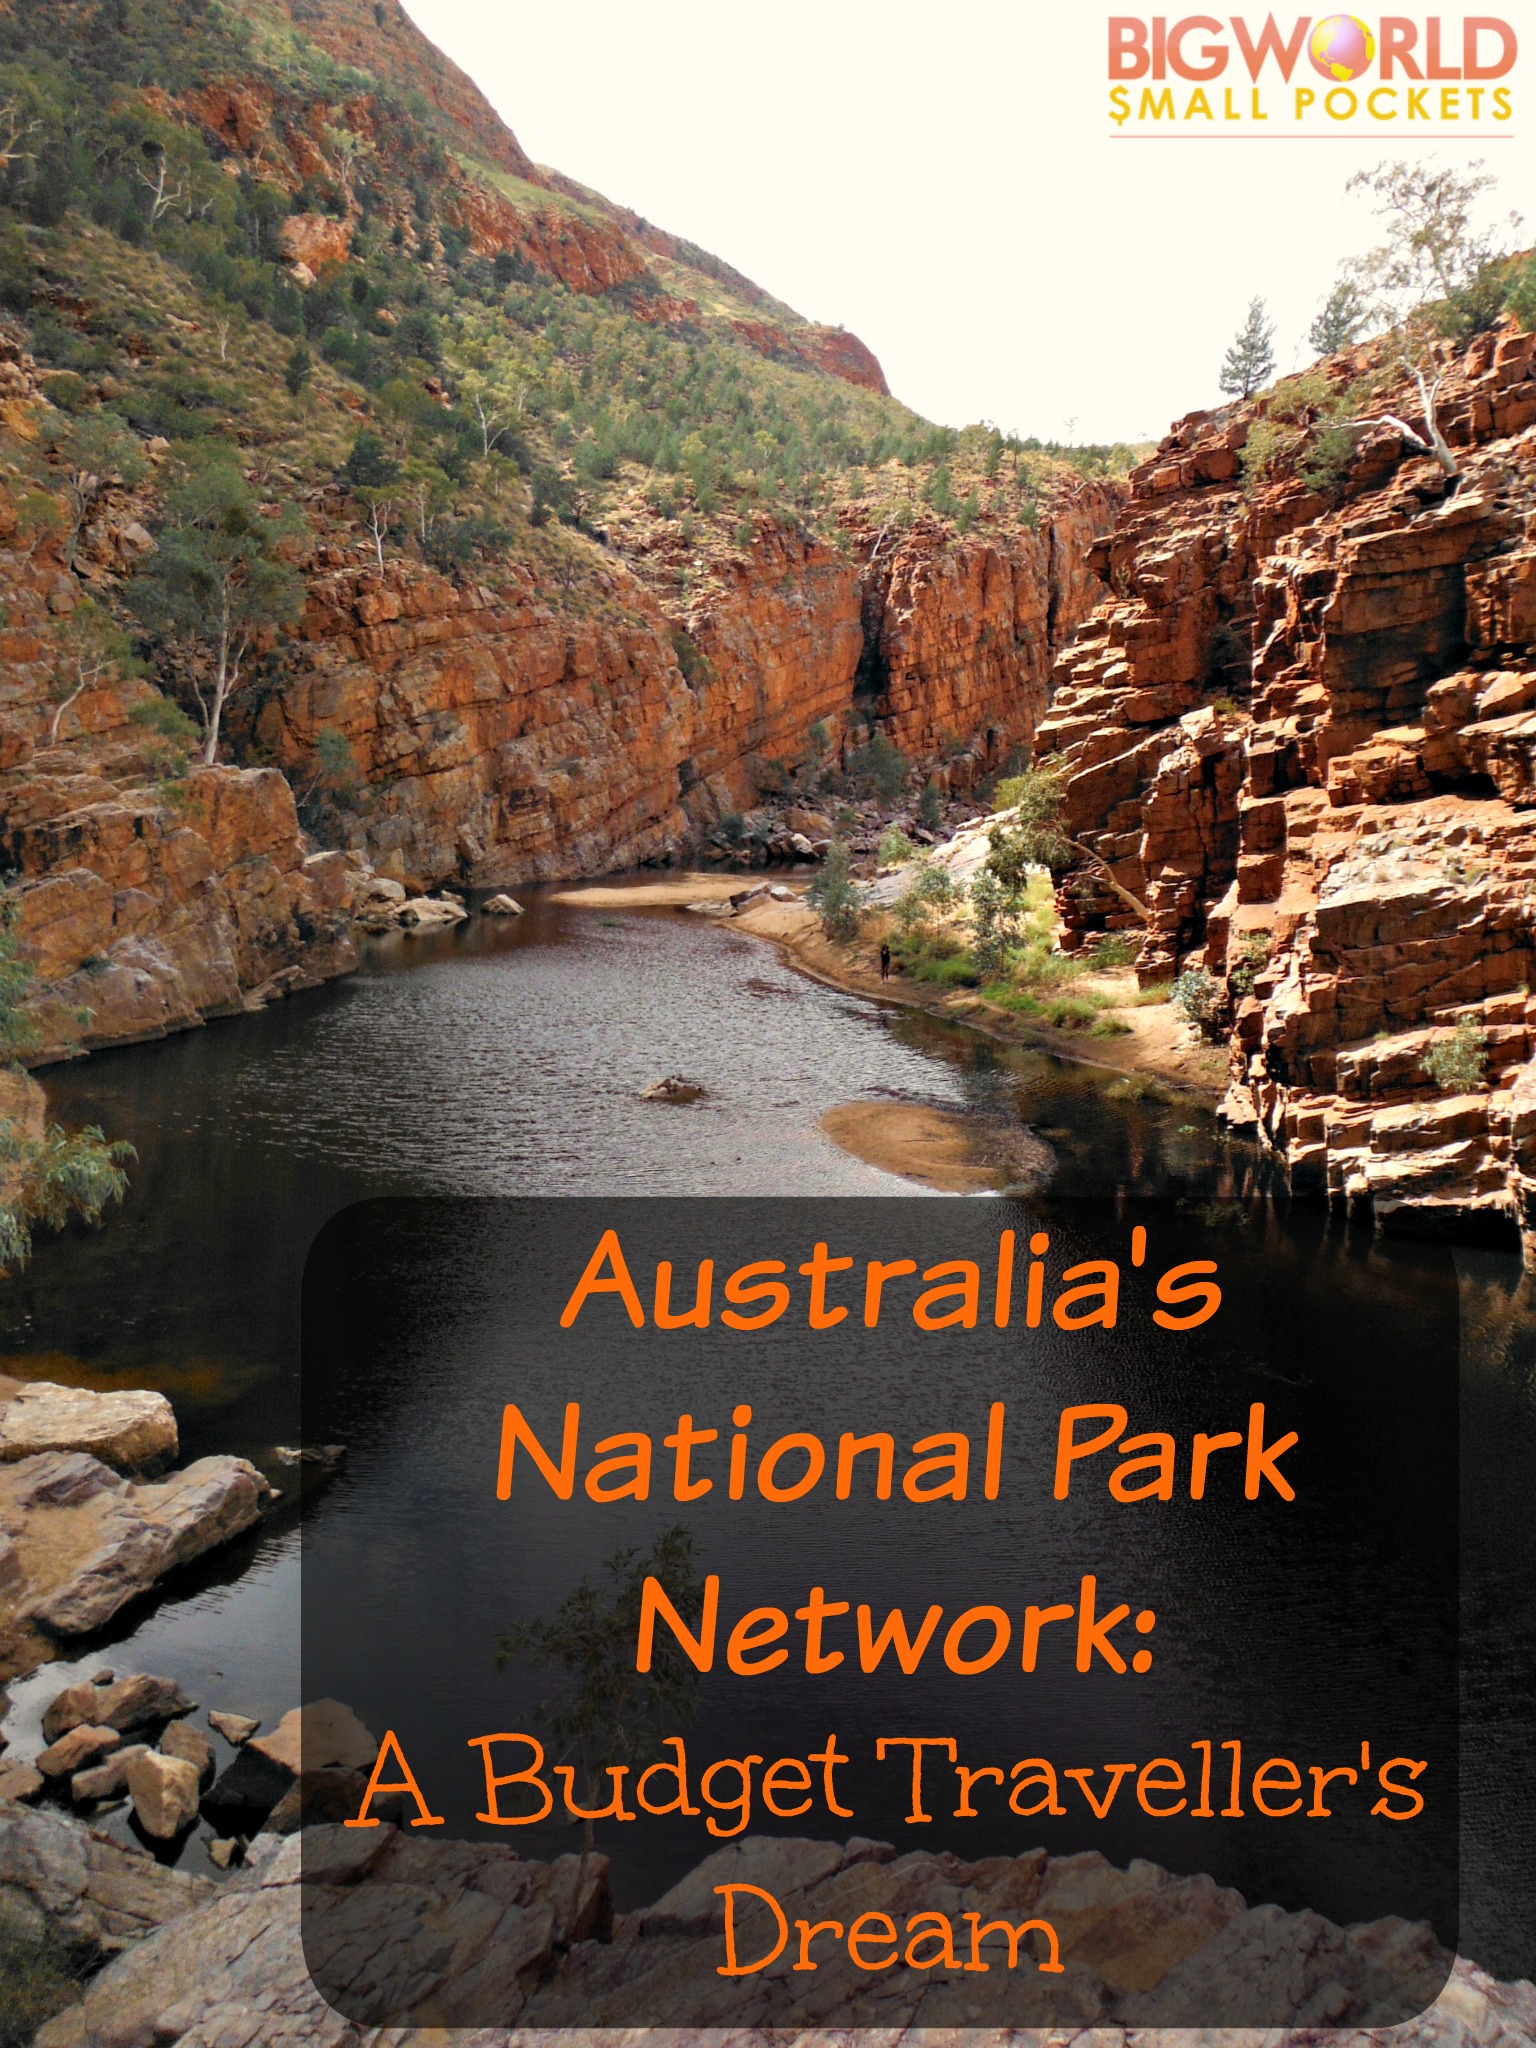 With free activities and cheap camping, Australian National Parks are a budget traveller's dream resource {Big World Small Pockets}